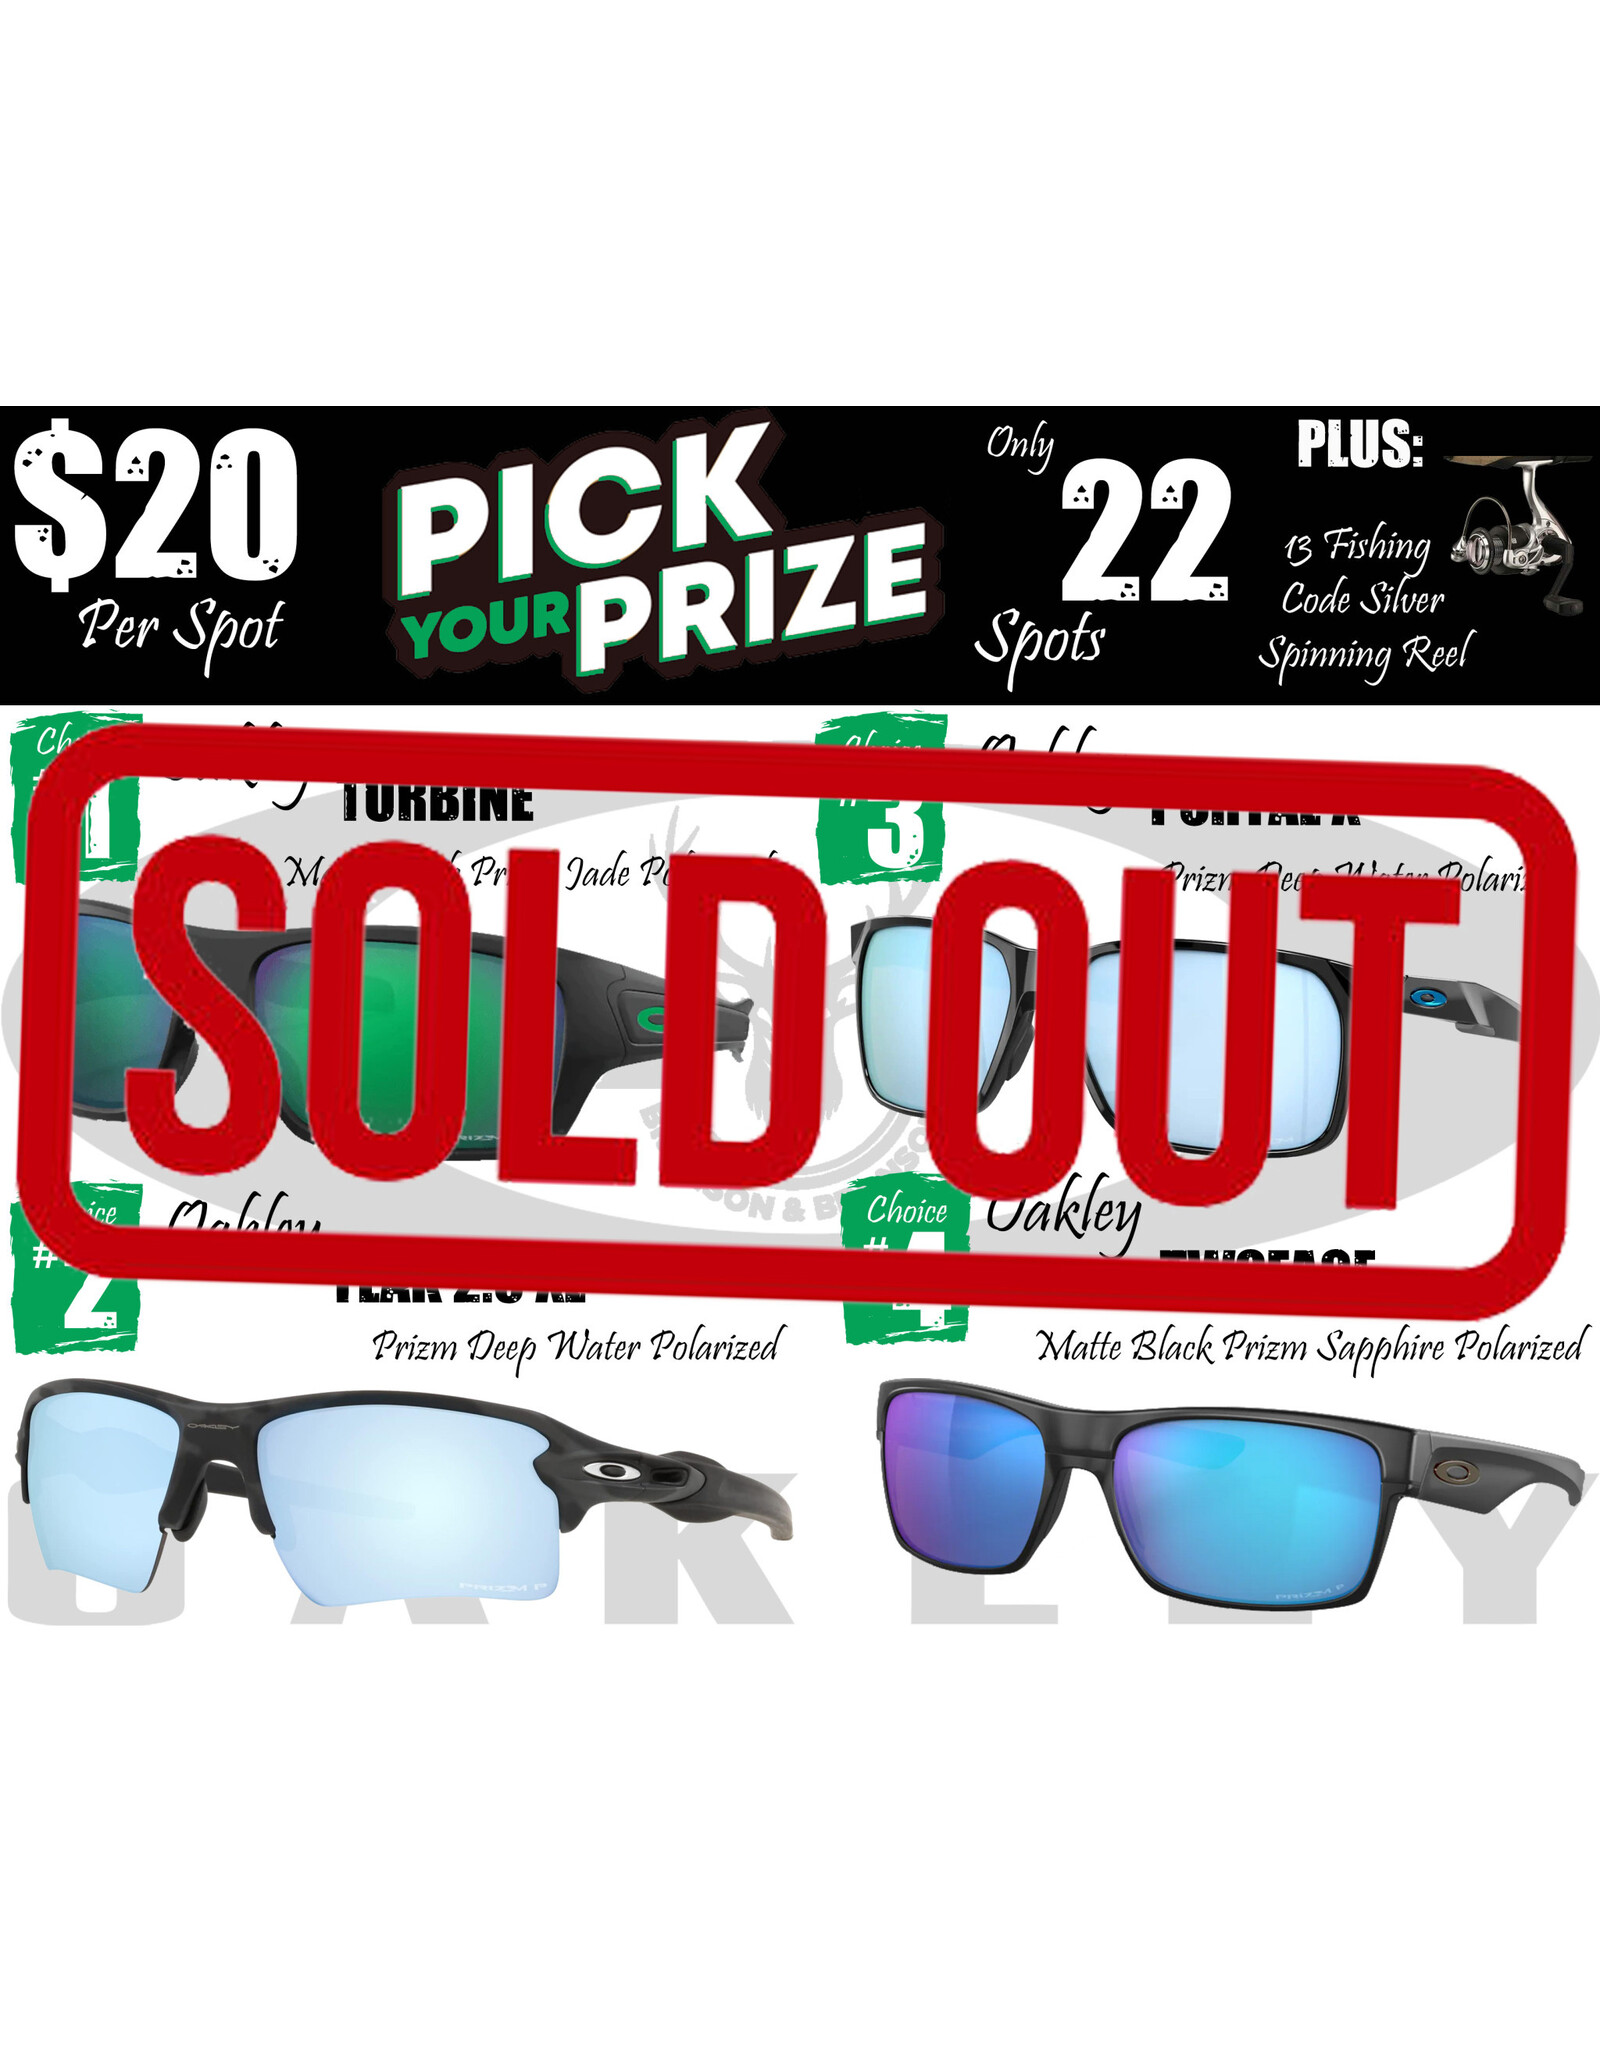 DRAW #1328 - Pick Your Prize - OAKLEY 1 of 4 +13Fishing